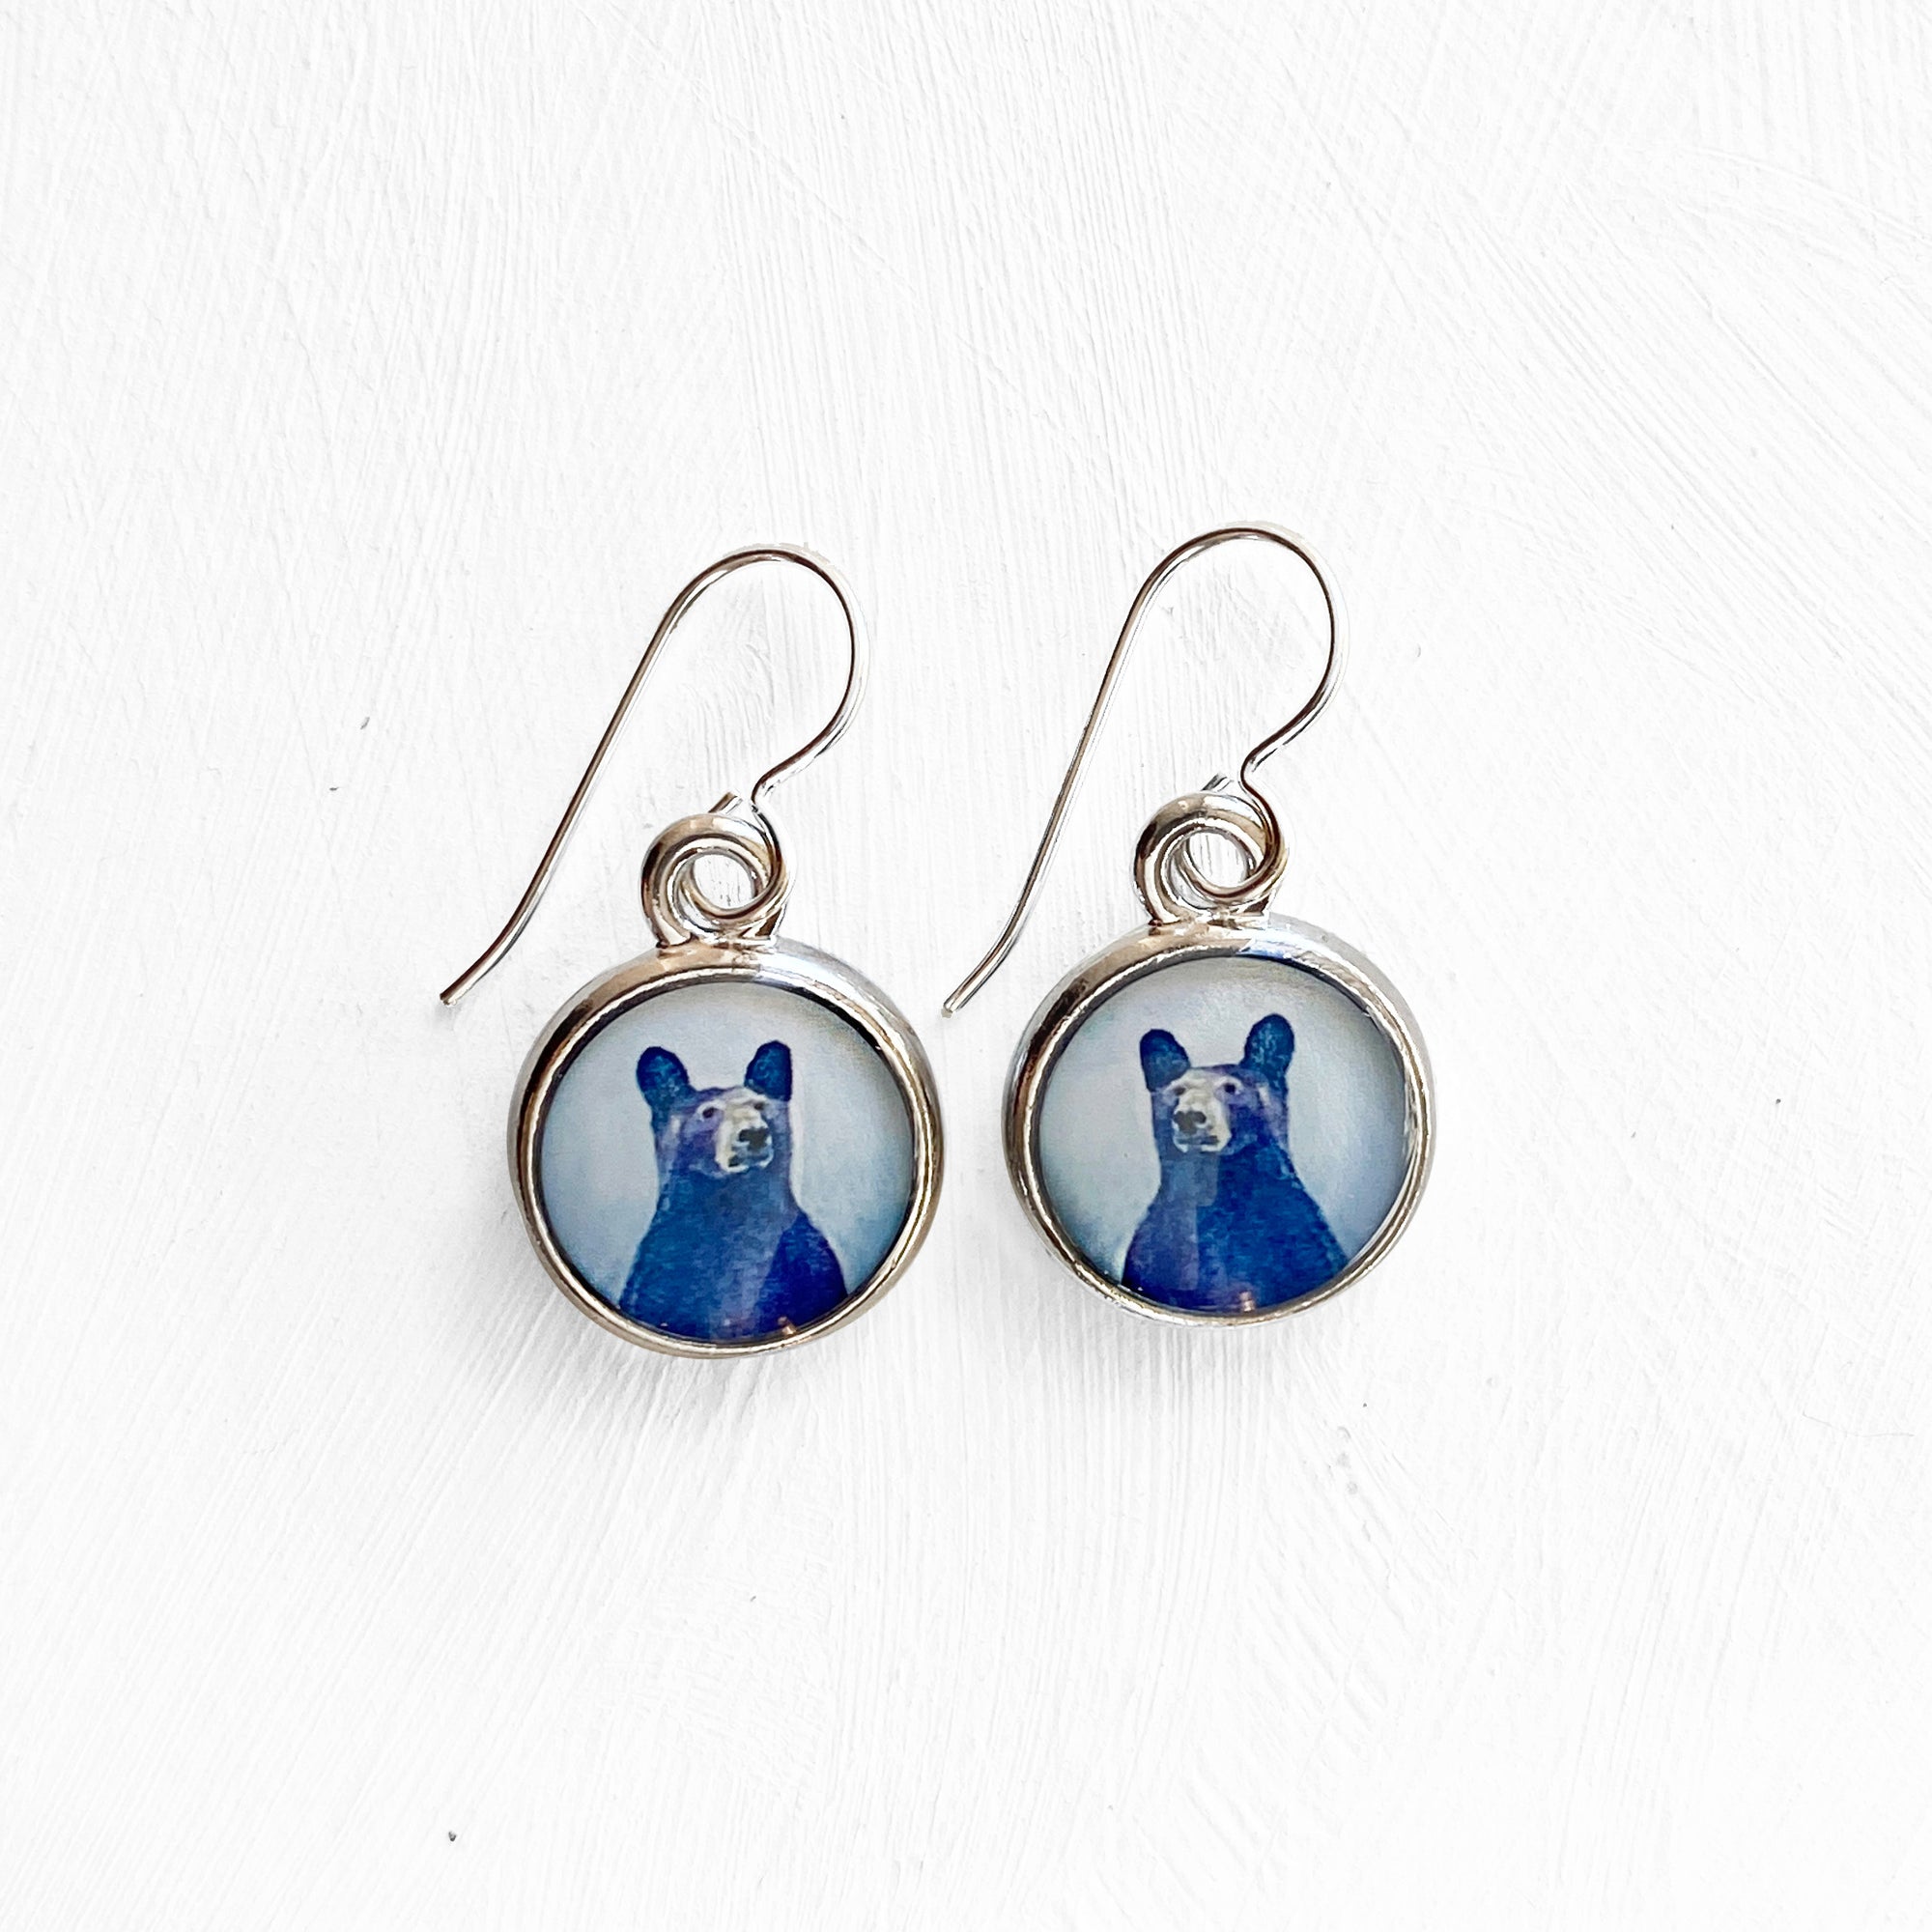 a pair of earrings with a picture of a dog